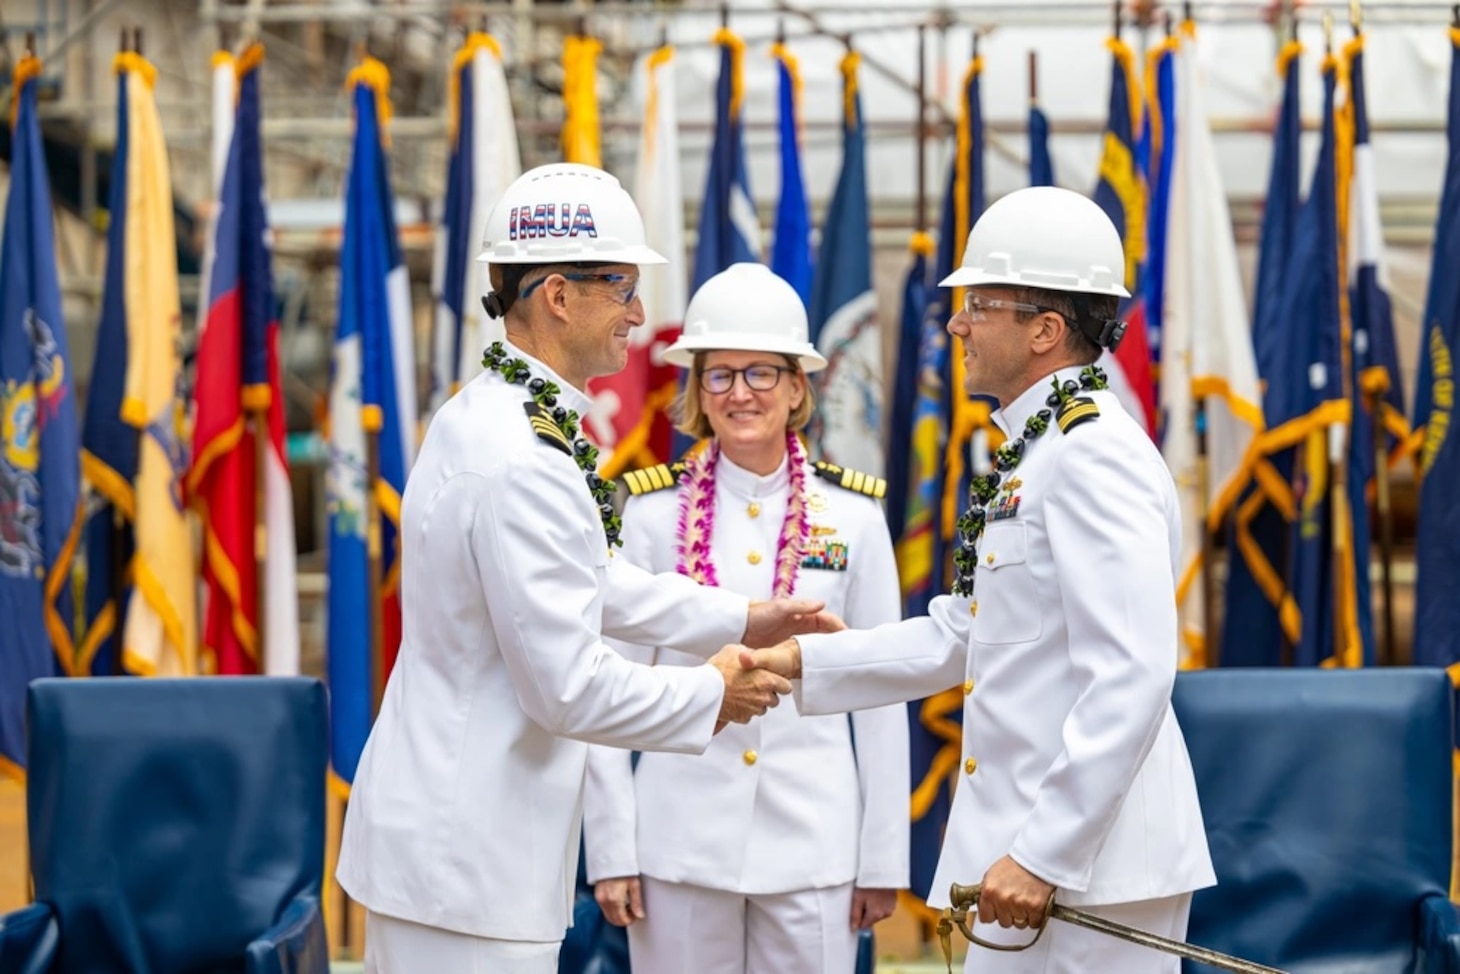 USS Chung-Hoon Awarded Navy Battle “E” Excellence Award during Change of Command Ceremony